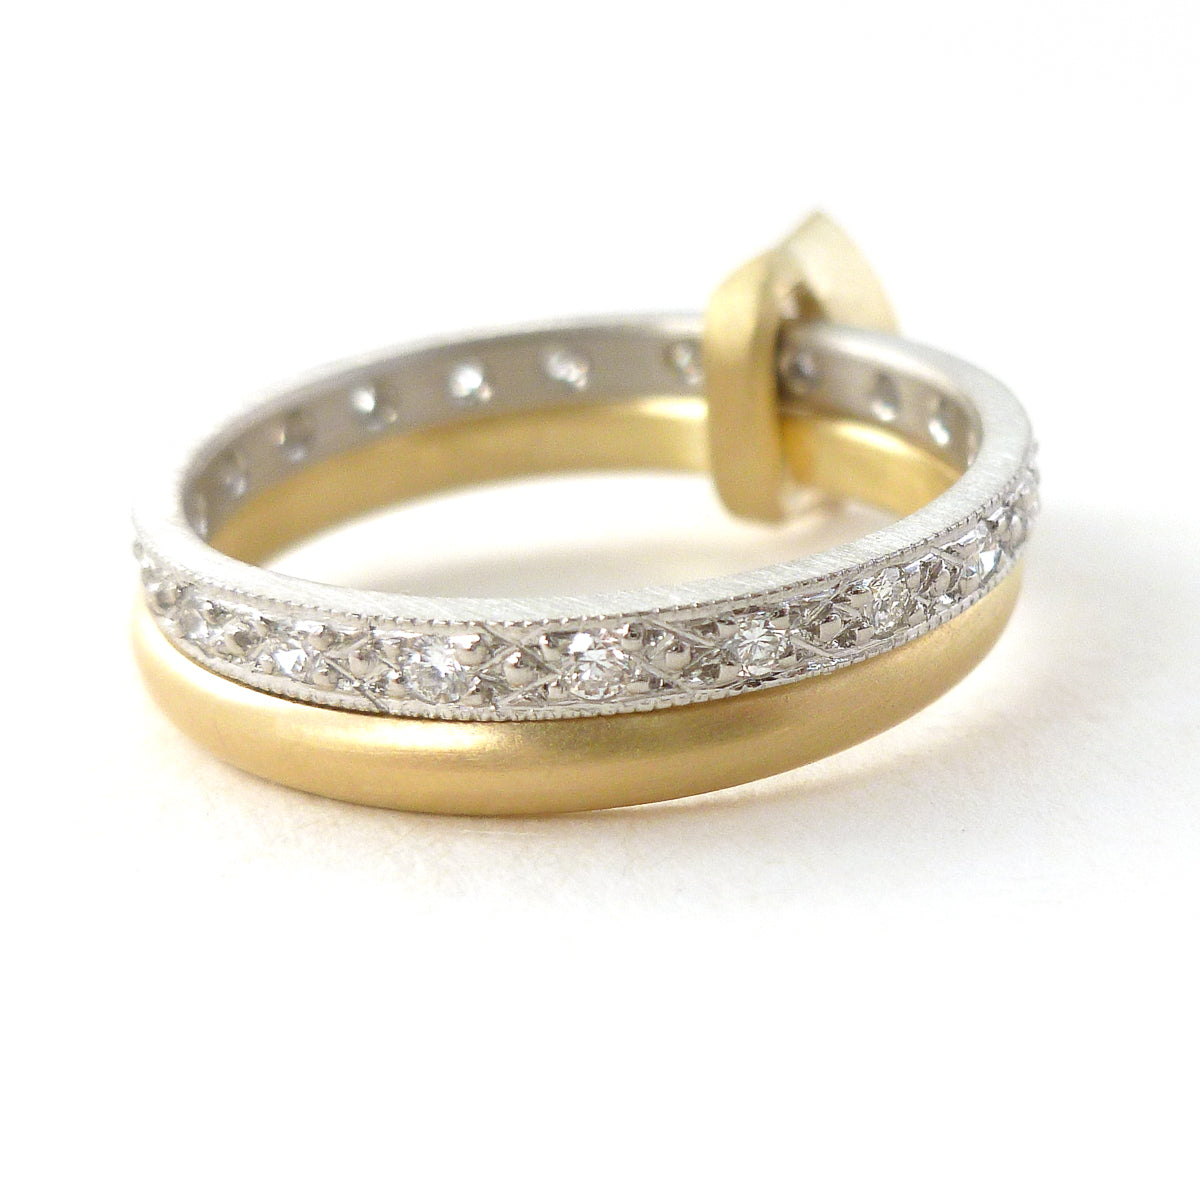 Platinum 18ct gold and marquise diamond ring, with pave set diamonds - contemporary.